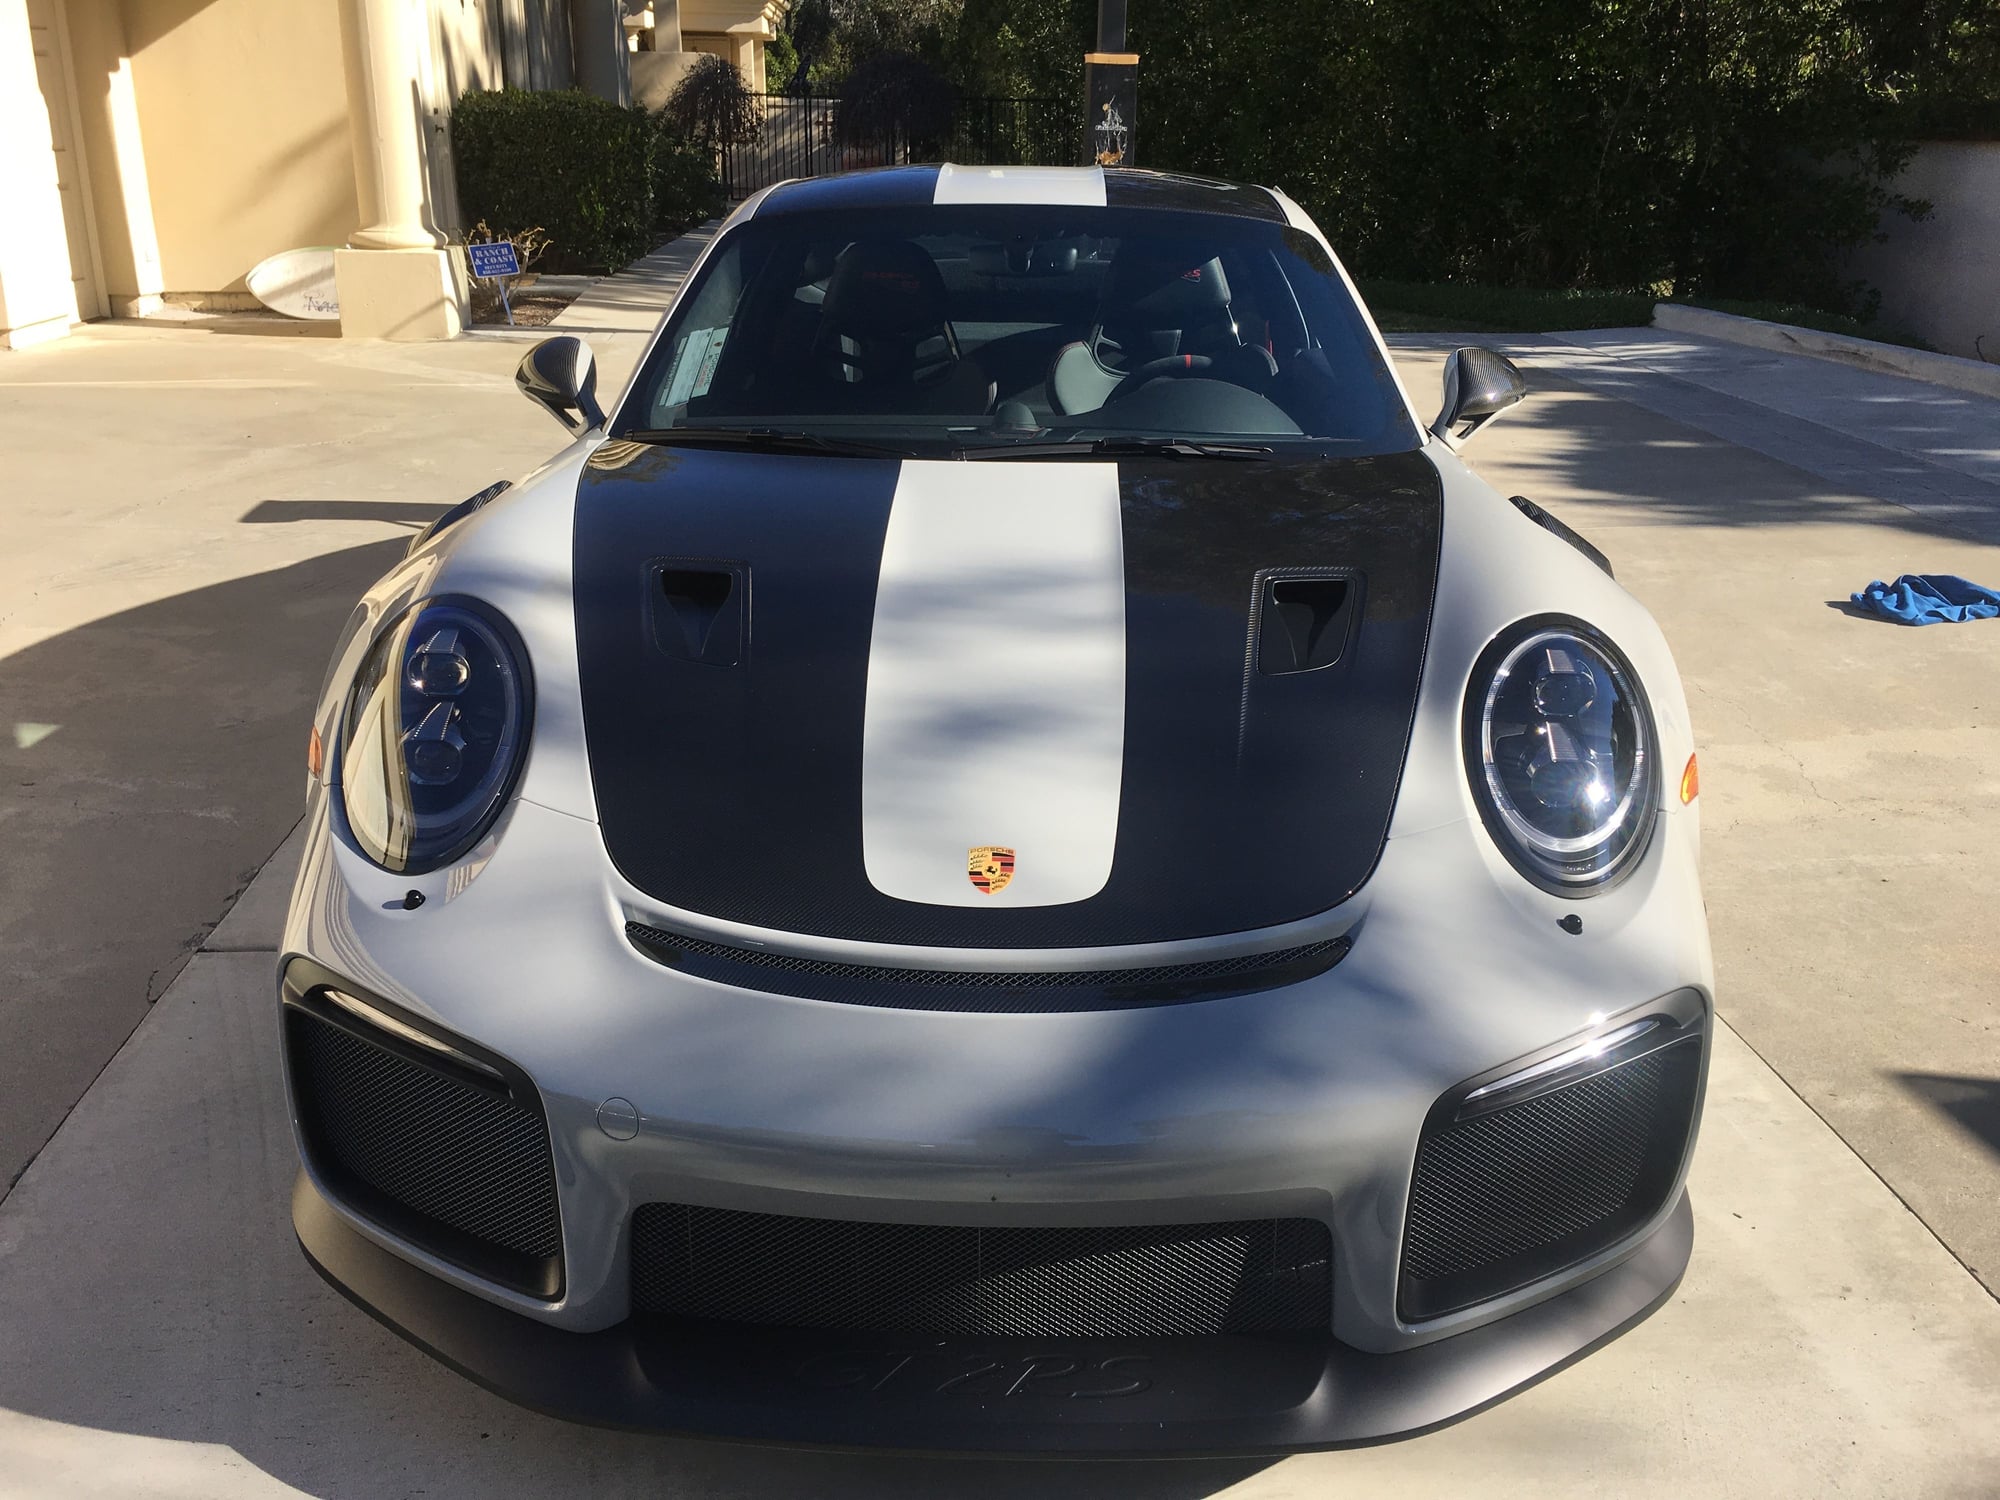 2018 Porsche 911 - 2018 Porsche 911 GT2 - Used - VIN WPOAE2A98JS186004 - 200 Miles - 6 cyl - 2WD - Automatic - Coupe - Other - Rancho Santa Fe, CA 92067, United States